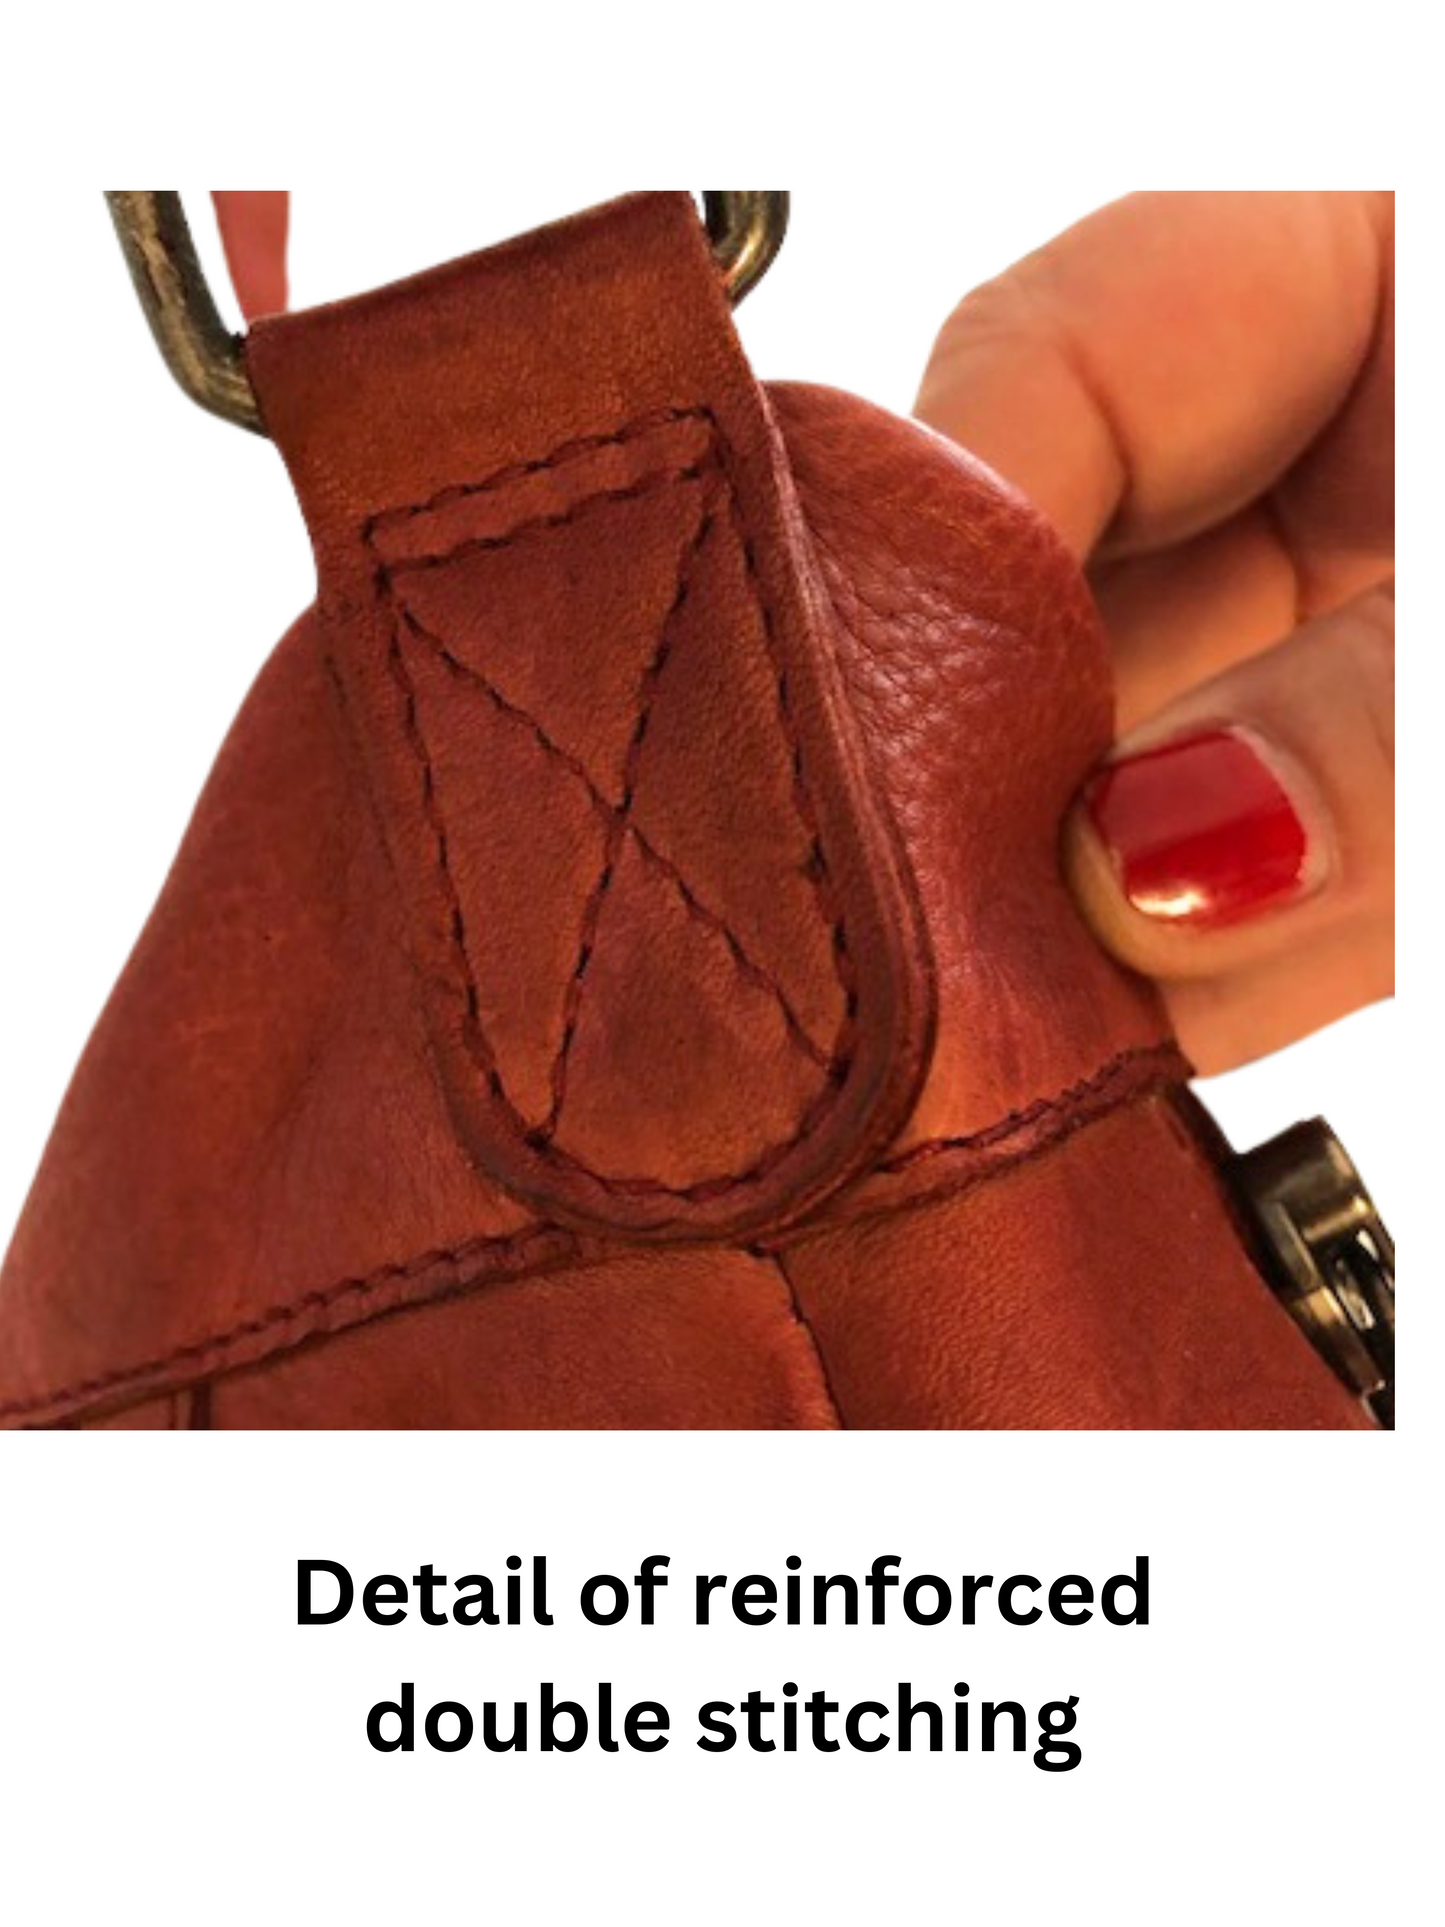 Concealed By Janko #613 Ruth Wine Conceal and Carry Handbag